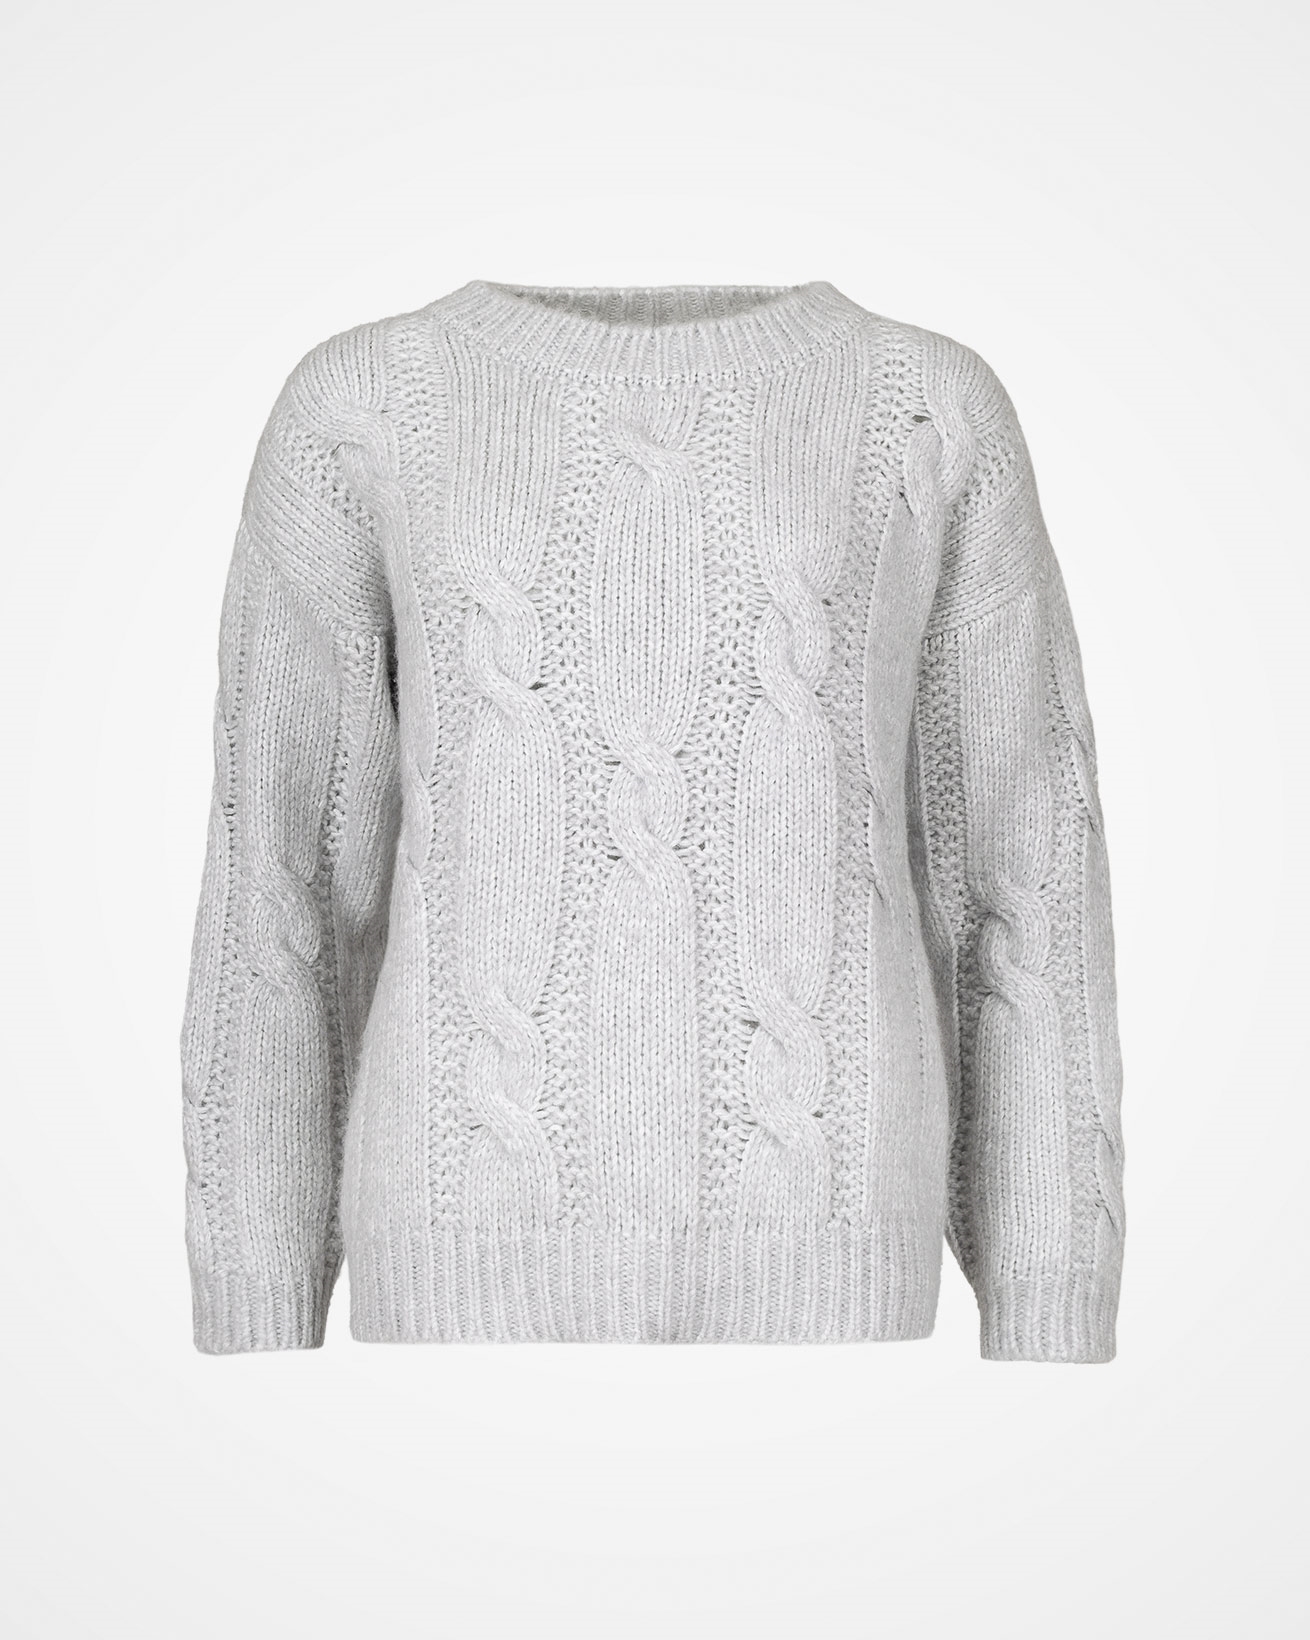 7808_luxe-cable-jumper_fossil_front.jpg